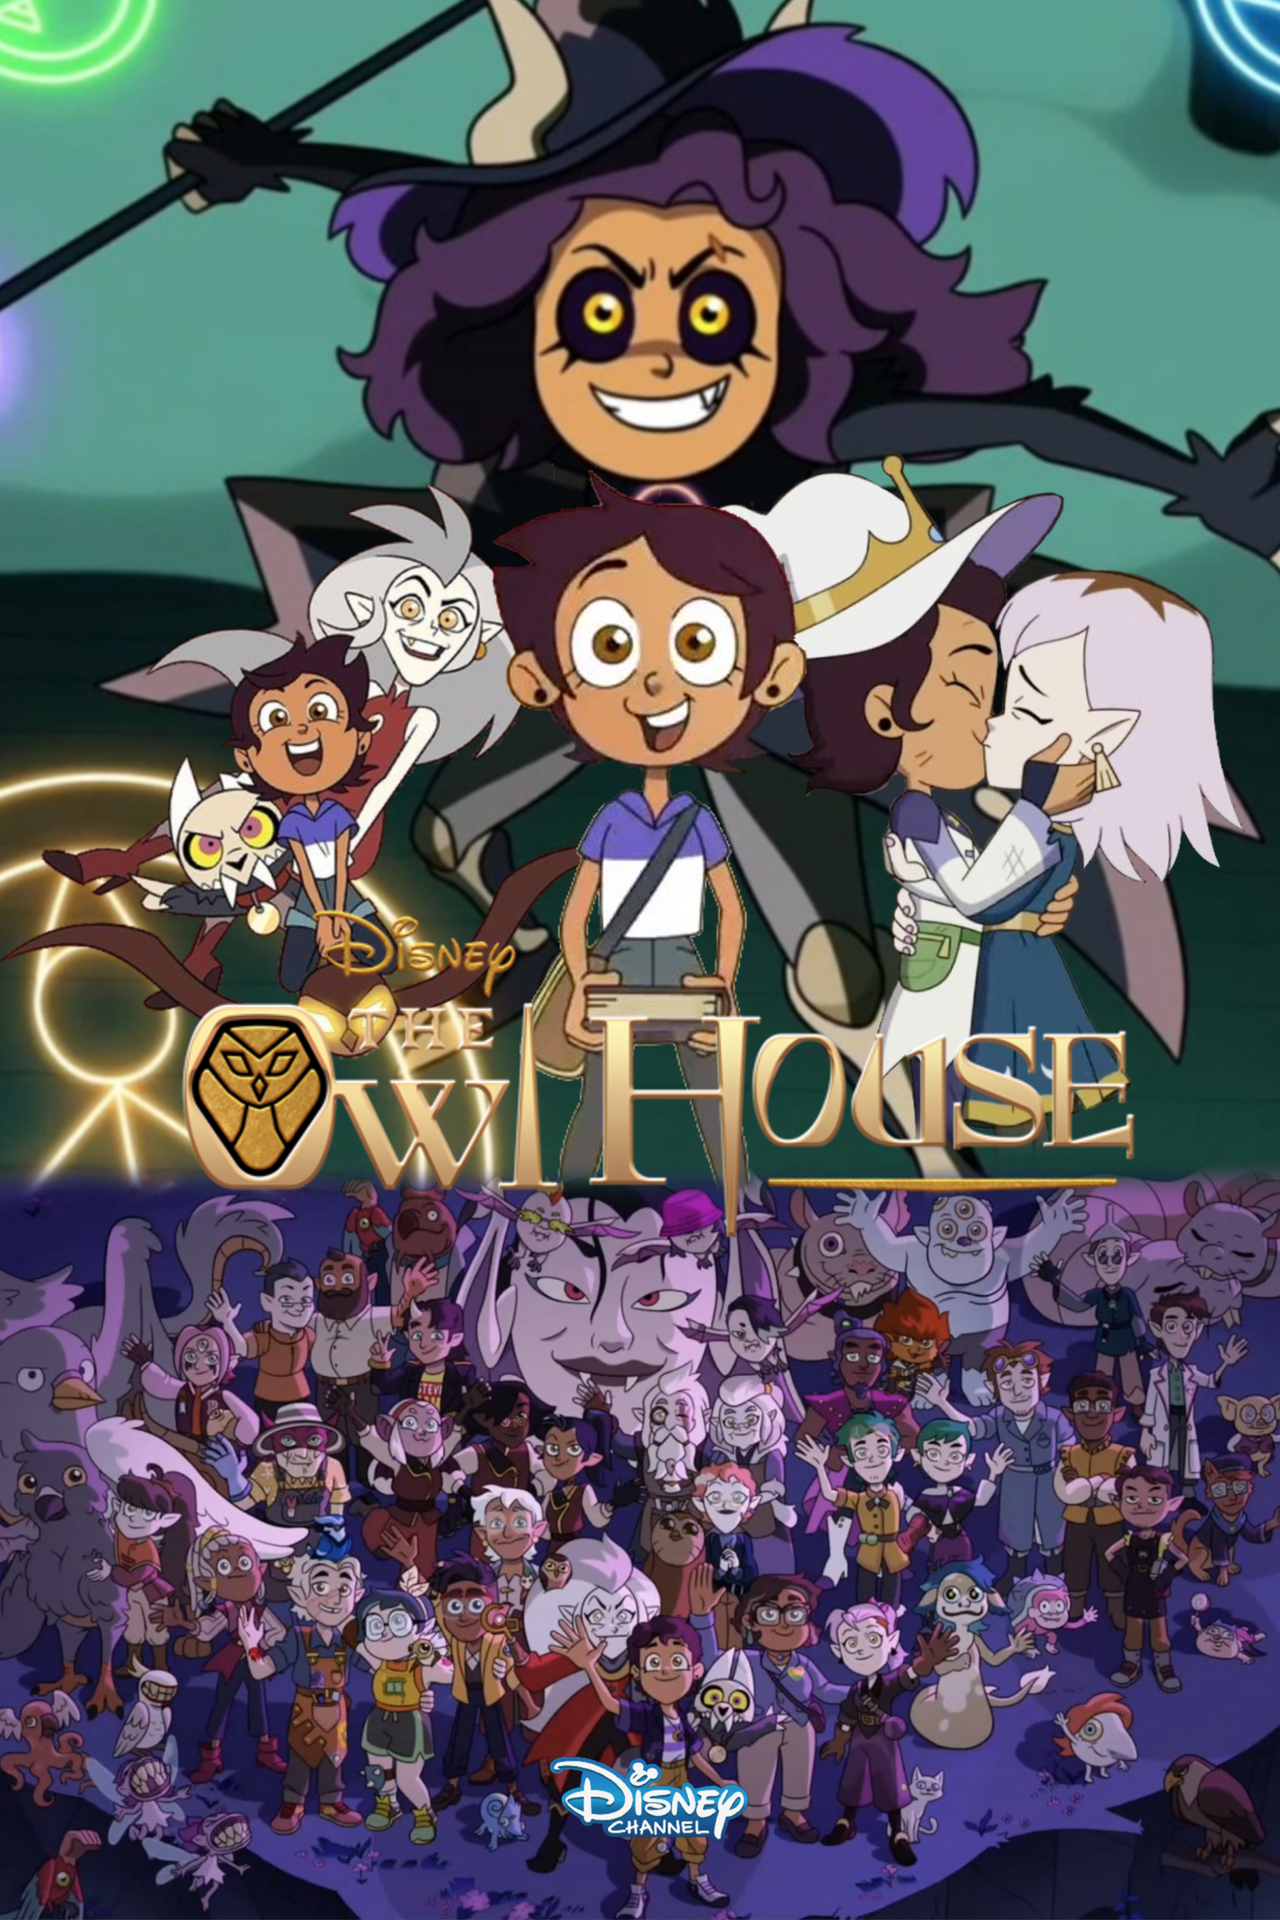 The Owl House Season 2 Wallpaper by ortial23 on DeviantArt